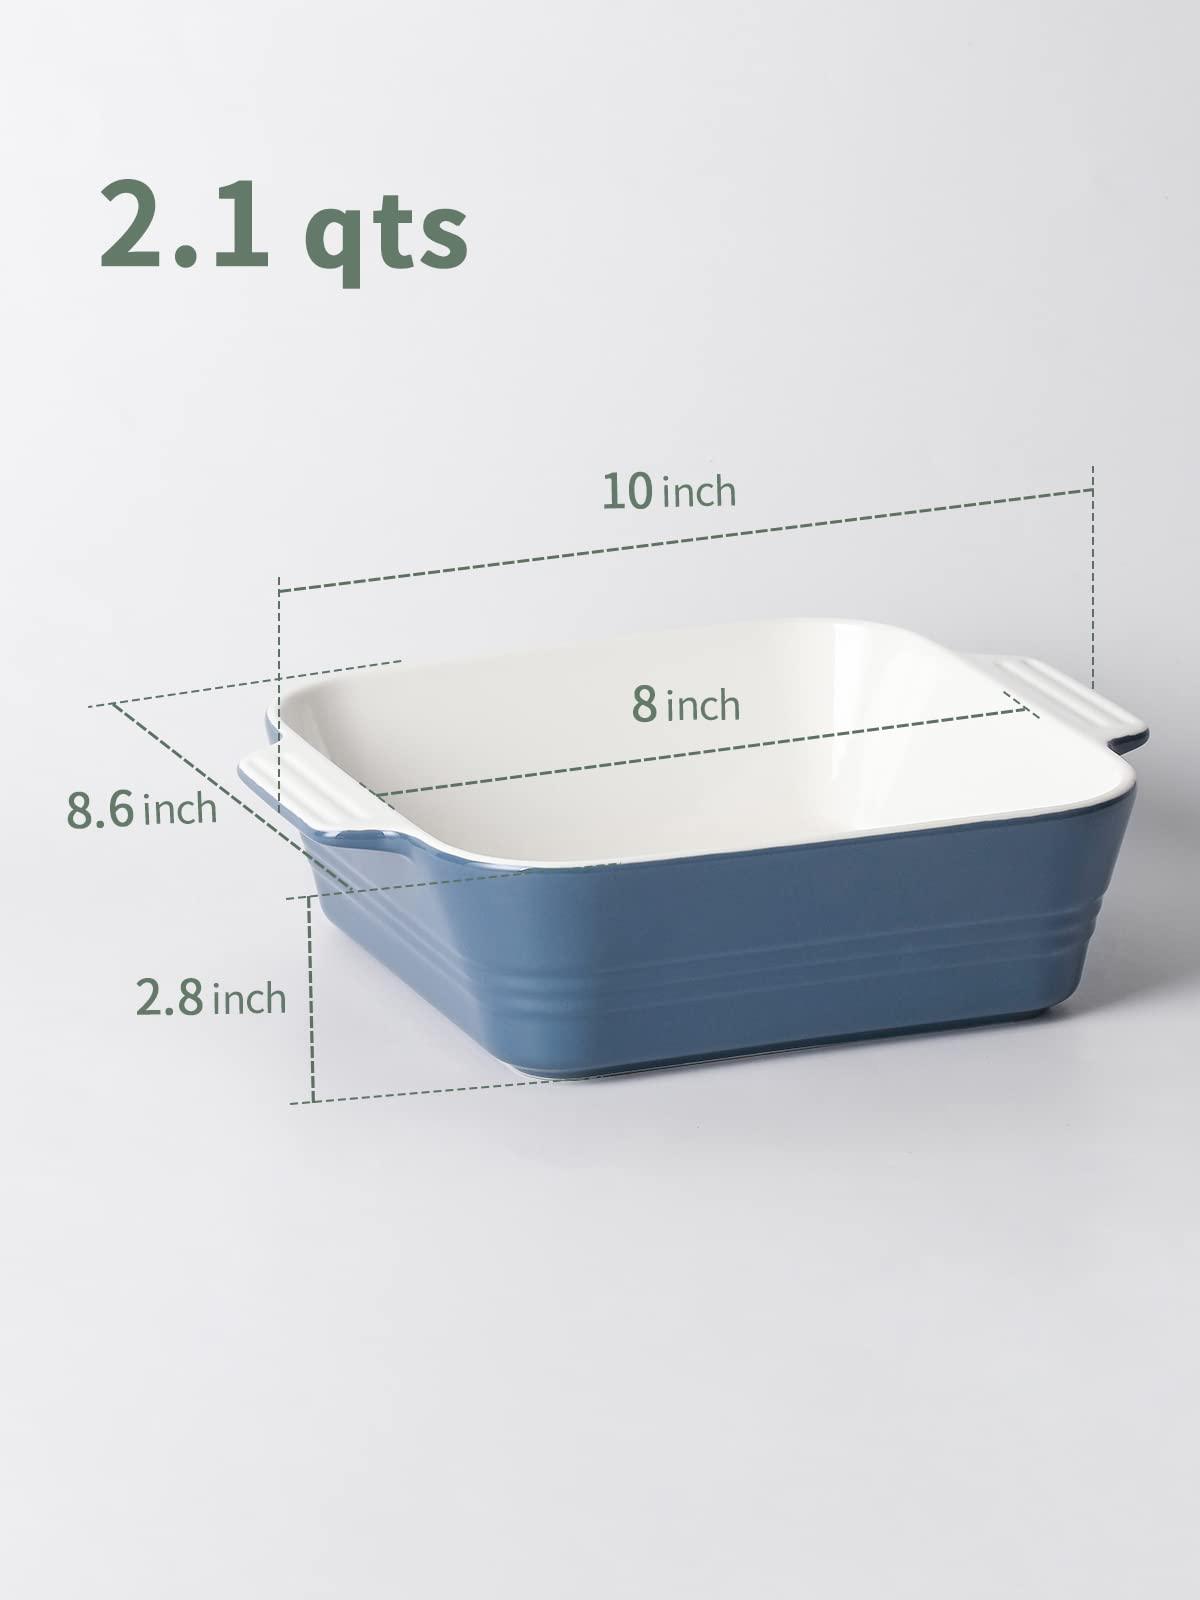 ZONESUM Baking Dish, 8x8 Lasagna Pan Deep, Ceramic Square Casserole dishes for oven, Baking Pan with Handle, for Brownie, Cake, Lasagna, Casserole, 2 Quart, Christmas Home Gift, Airy Blue - CookCave